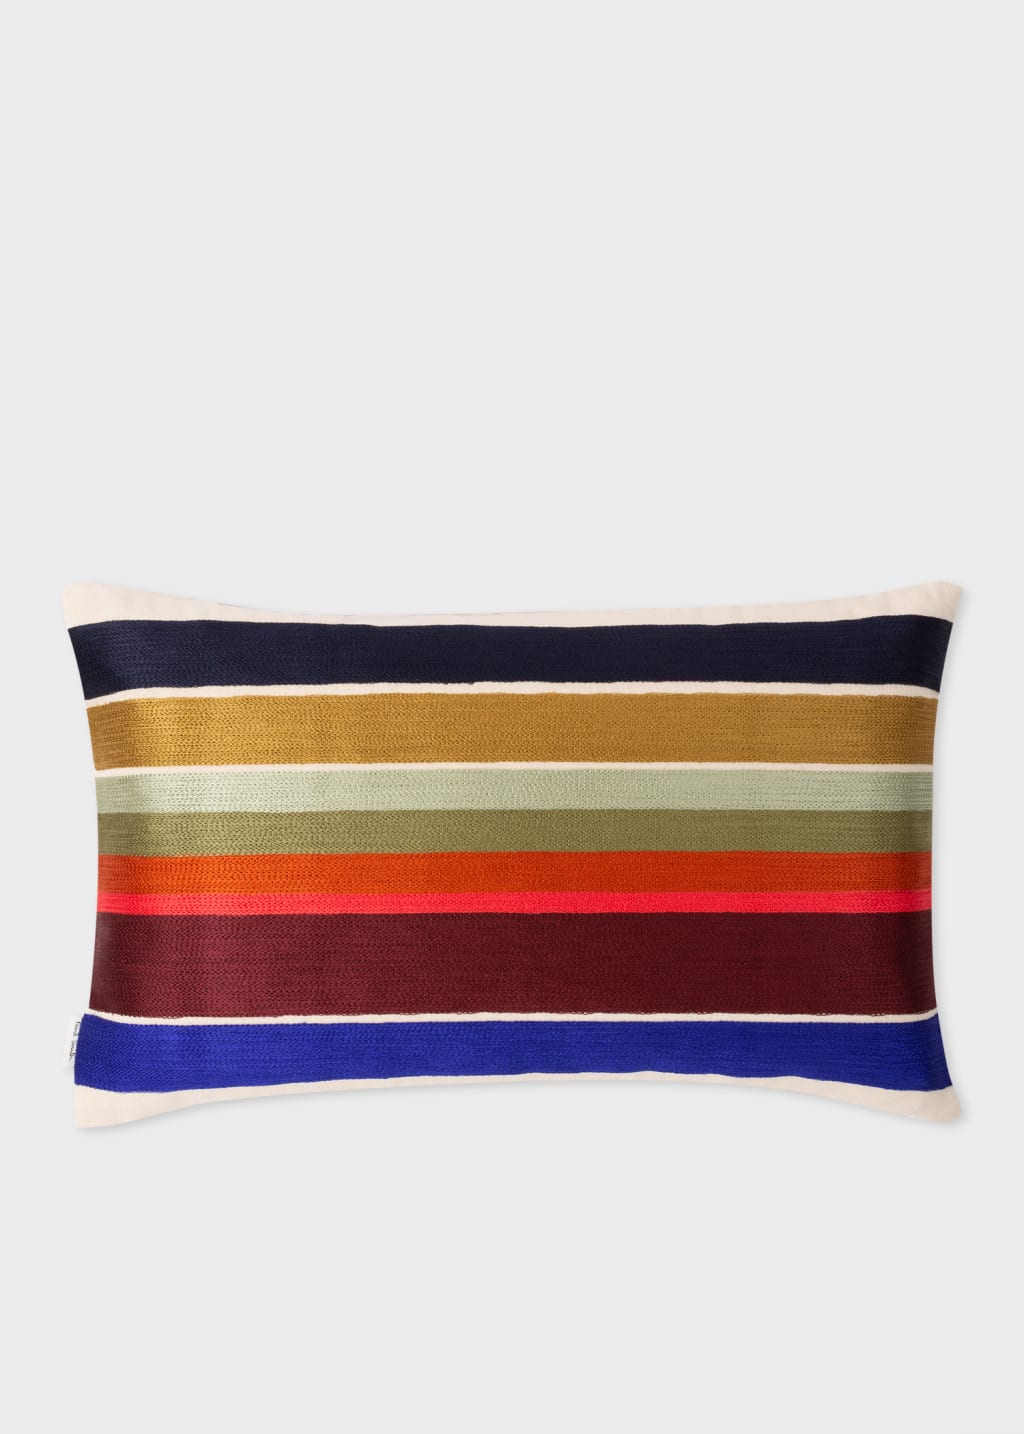 Front View - Ecru Embroidered 'Signature Stripe' Bolster Cushion Paul Smith